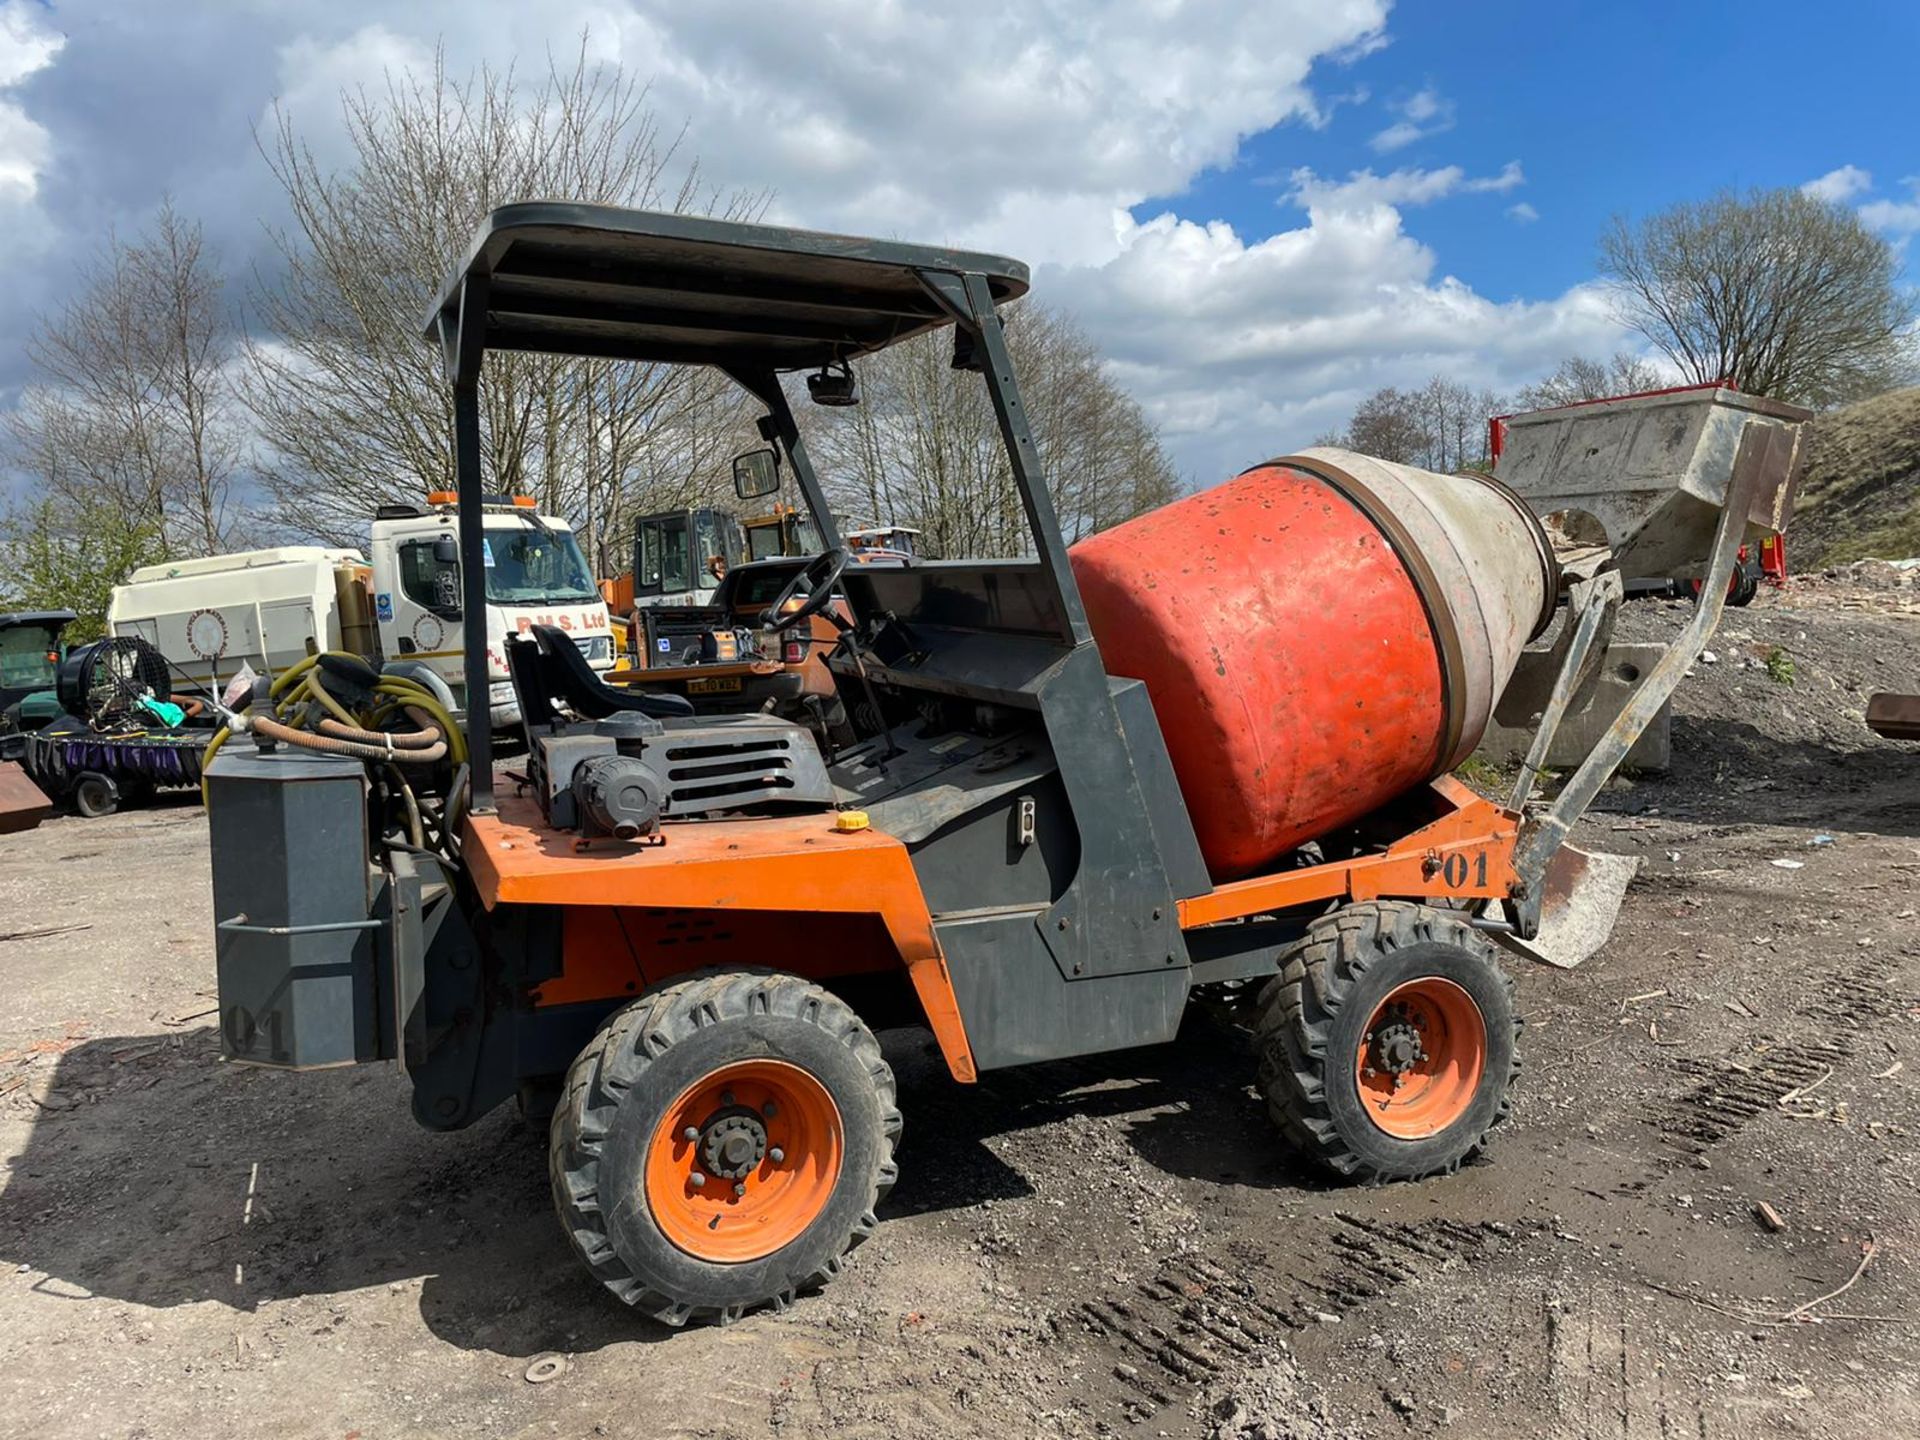 2010 MZ Imer 1000 Self Loading Mixer, Runs Drives And Works, Showing 3029 Hours, All Terrain Tyres